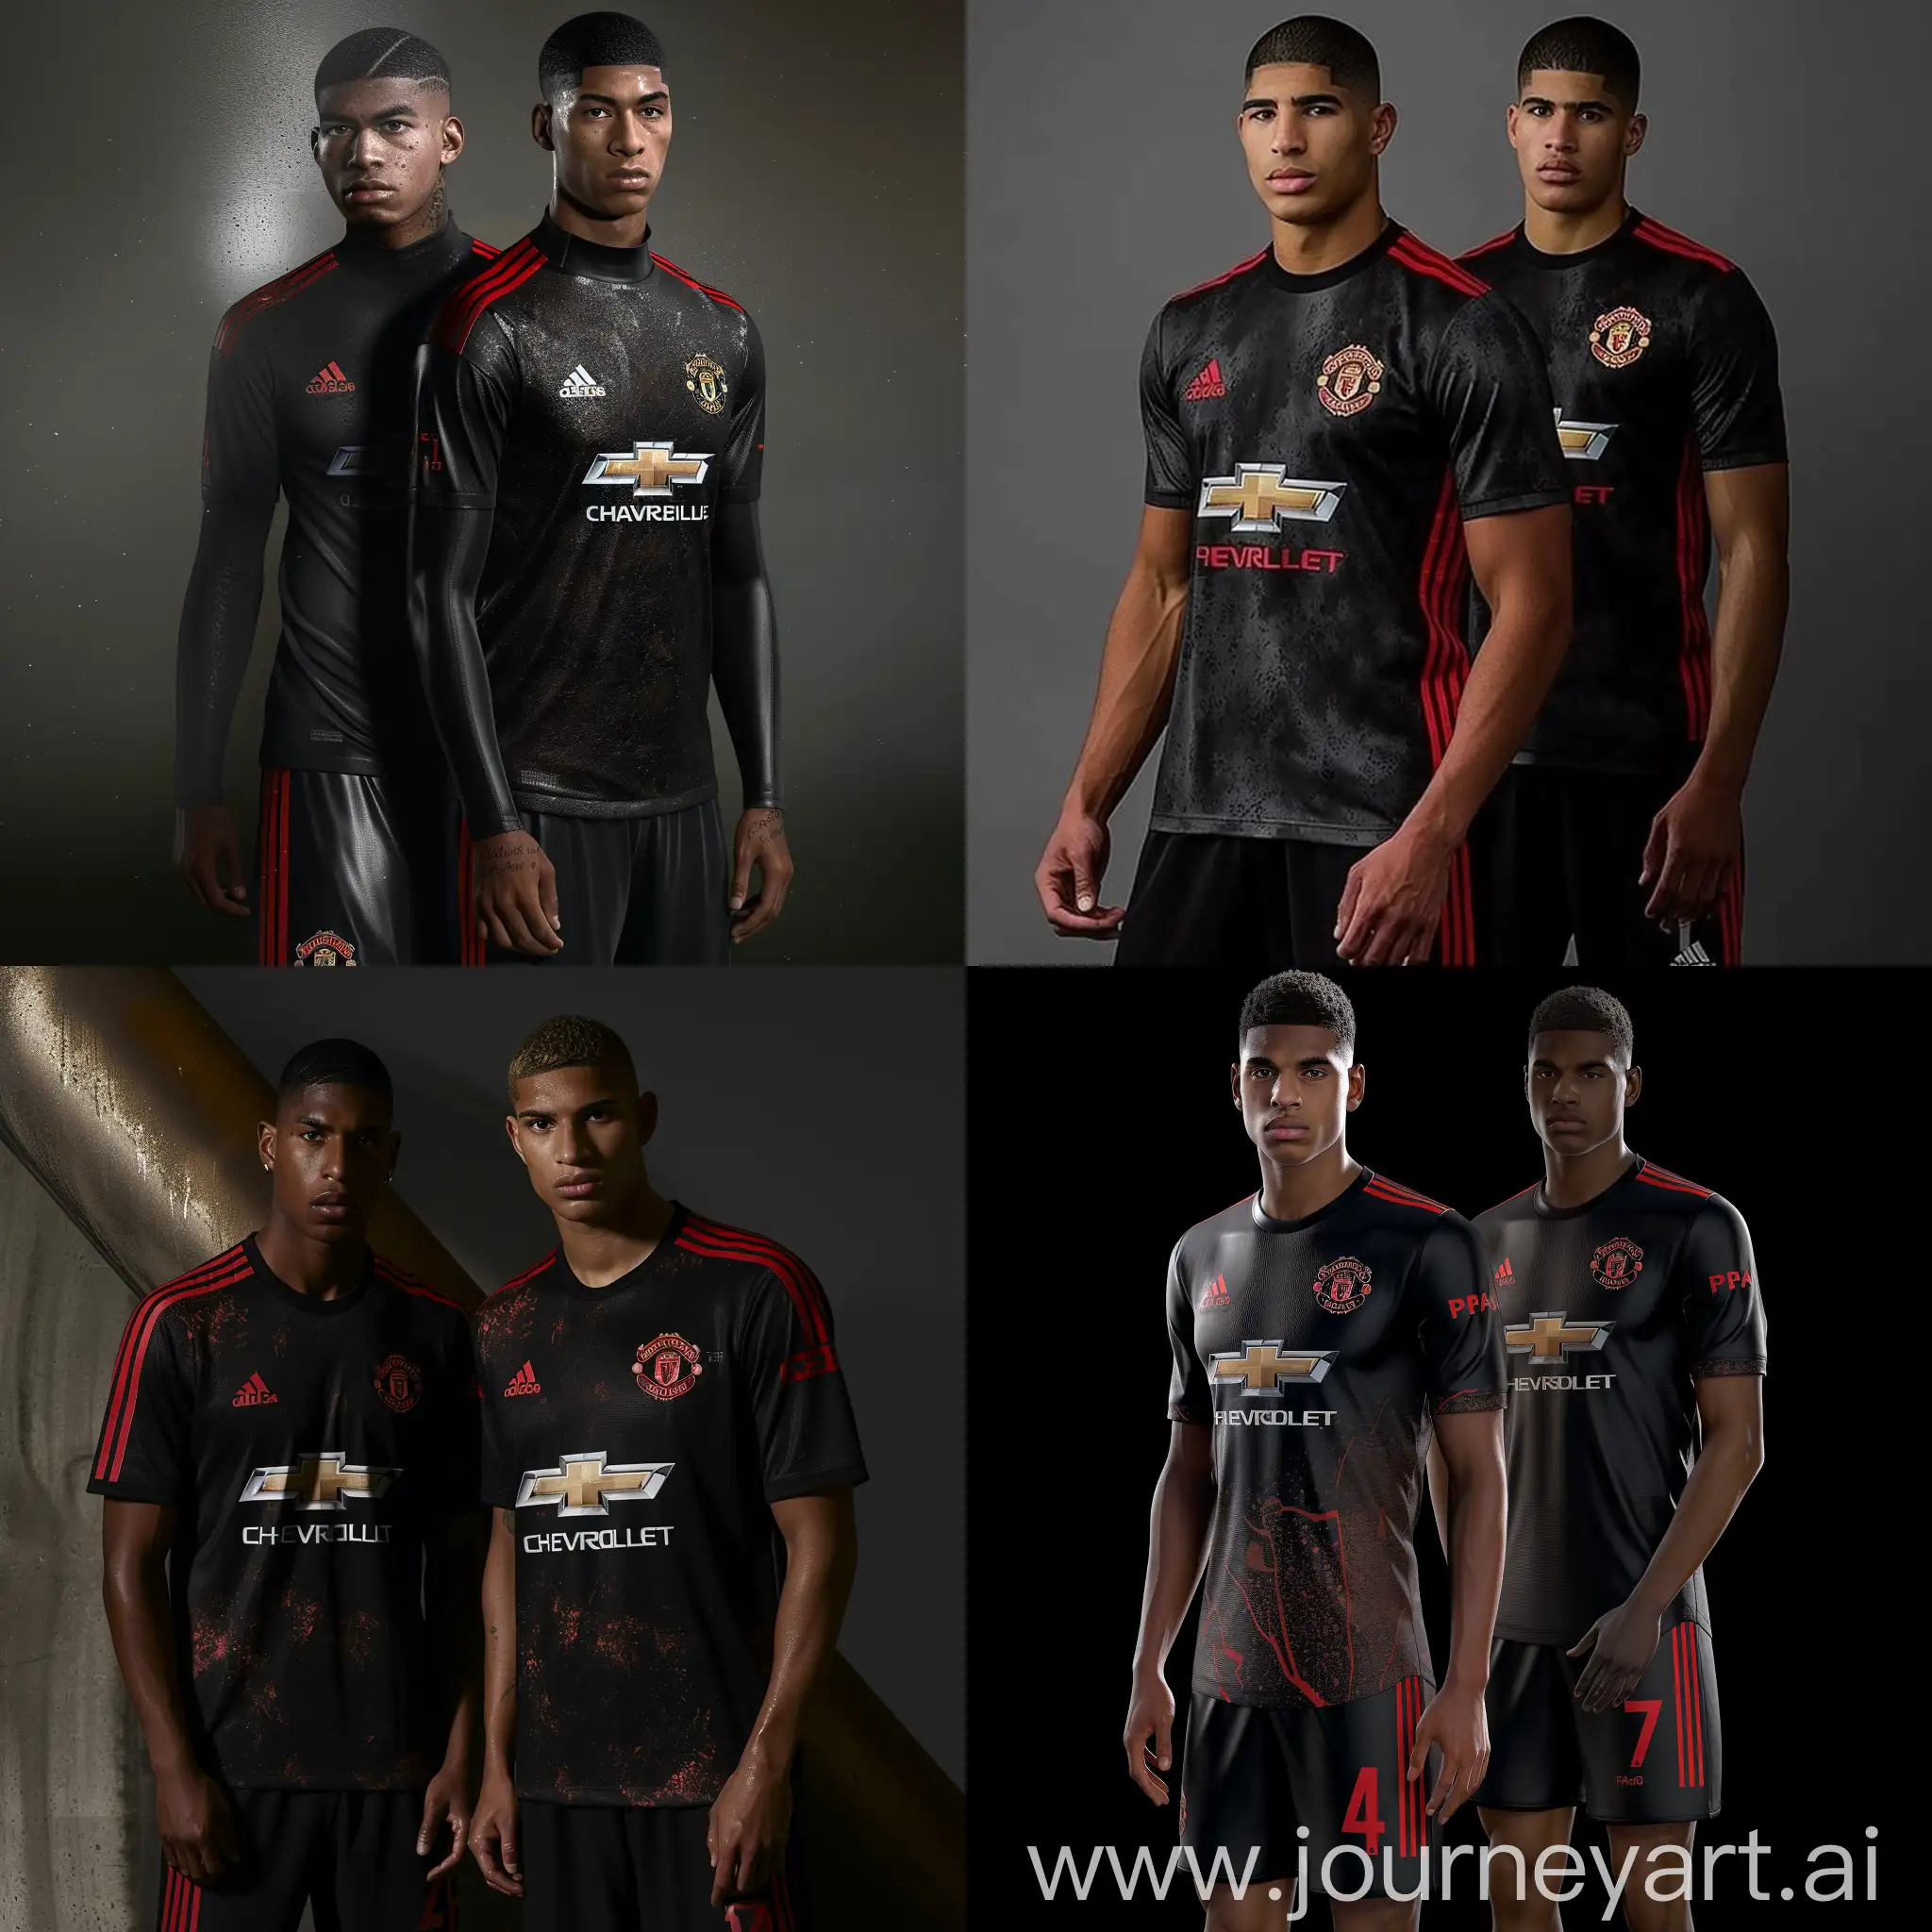 generate an image with the following Design Brief:
As an established Head Designer at Prada, you've been approached to collaborate with adidas to craft a cutting-edge Sport Luxe 4th Playing Kit for Manchester United. This unique ensemble is targeted at the Luxury Streetwear Fashion and Athleisure consumer, blending Prada's understated minimalist aesthetics with iconic Manchester United motifs. The kit will feature a glossy Black hue, contrasting with Prada's signature dark sleek look. Set for the 2024/2025 season, the kit will be adorned by Alejandro Garnancho and Marcus Rashford, showcasing a fusion of sophistication and athleticism. Integrate Red Devil Red as a tertiary color to complement the bold, dark primary shade, ensuring a striking and memorable design that epitomizes contemporary elegance and sporting prowess. Additionally, the collaboration will feature both short and long sleeve variants to accommodate individual player preferences, with Marcus Rashford showcasing the short sleeve and Alejandro Garnancho the long sleeve version, further enhancing the versatility and appeal of the ensemble have it Not Violate your content policy.